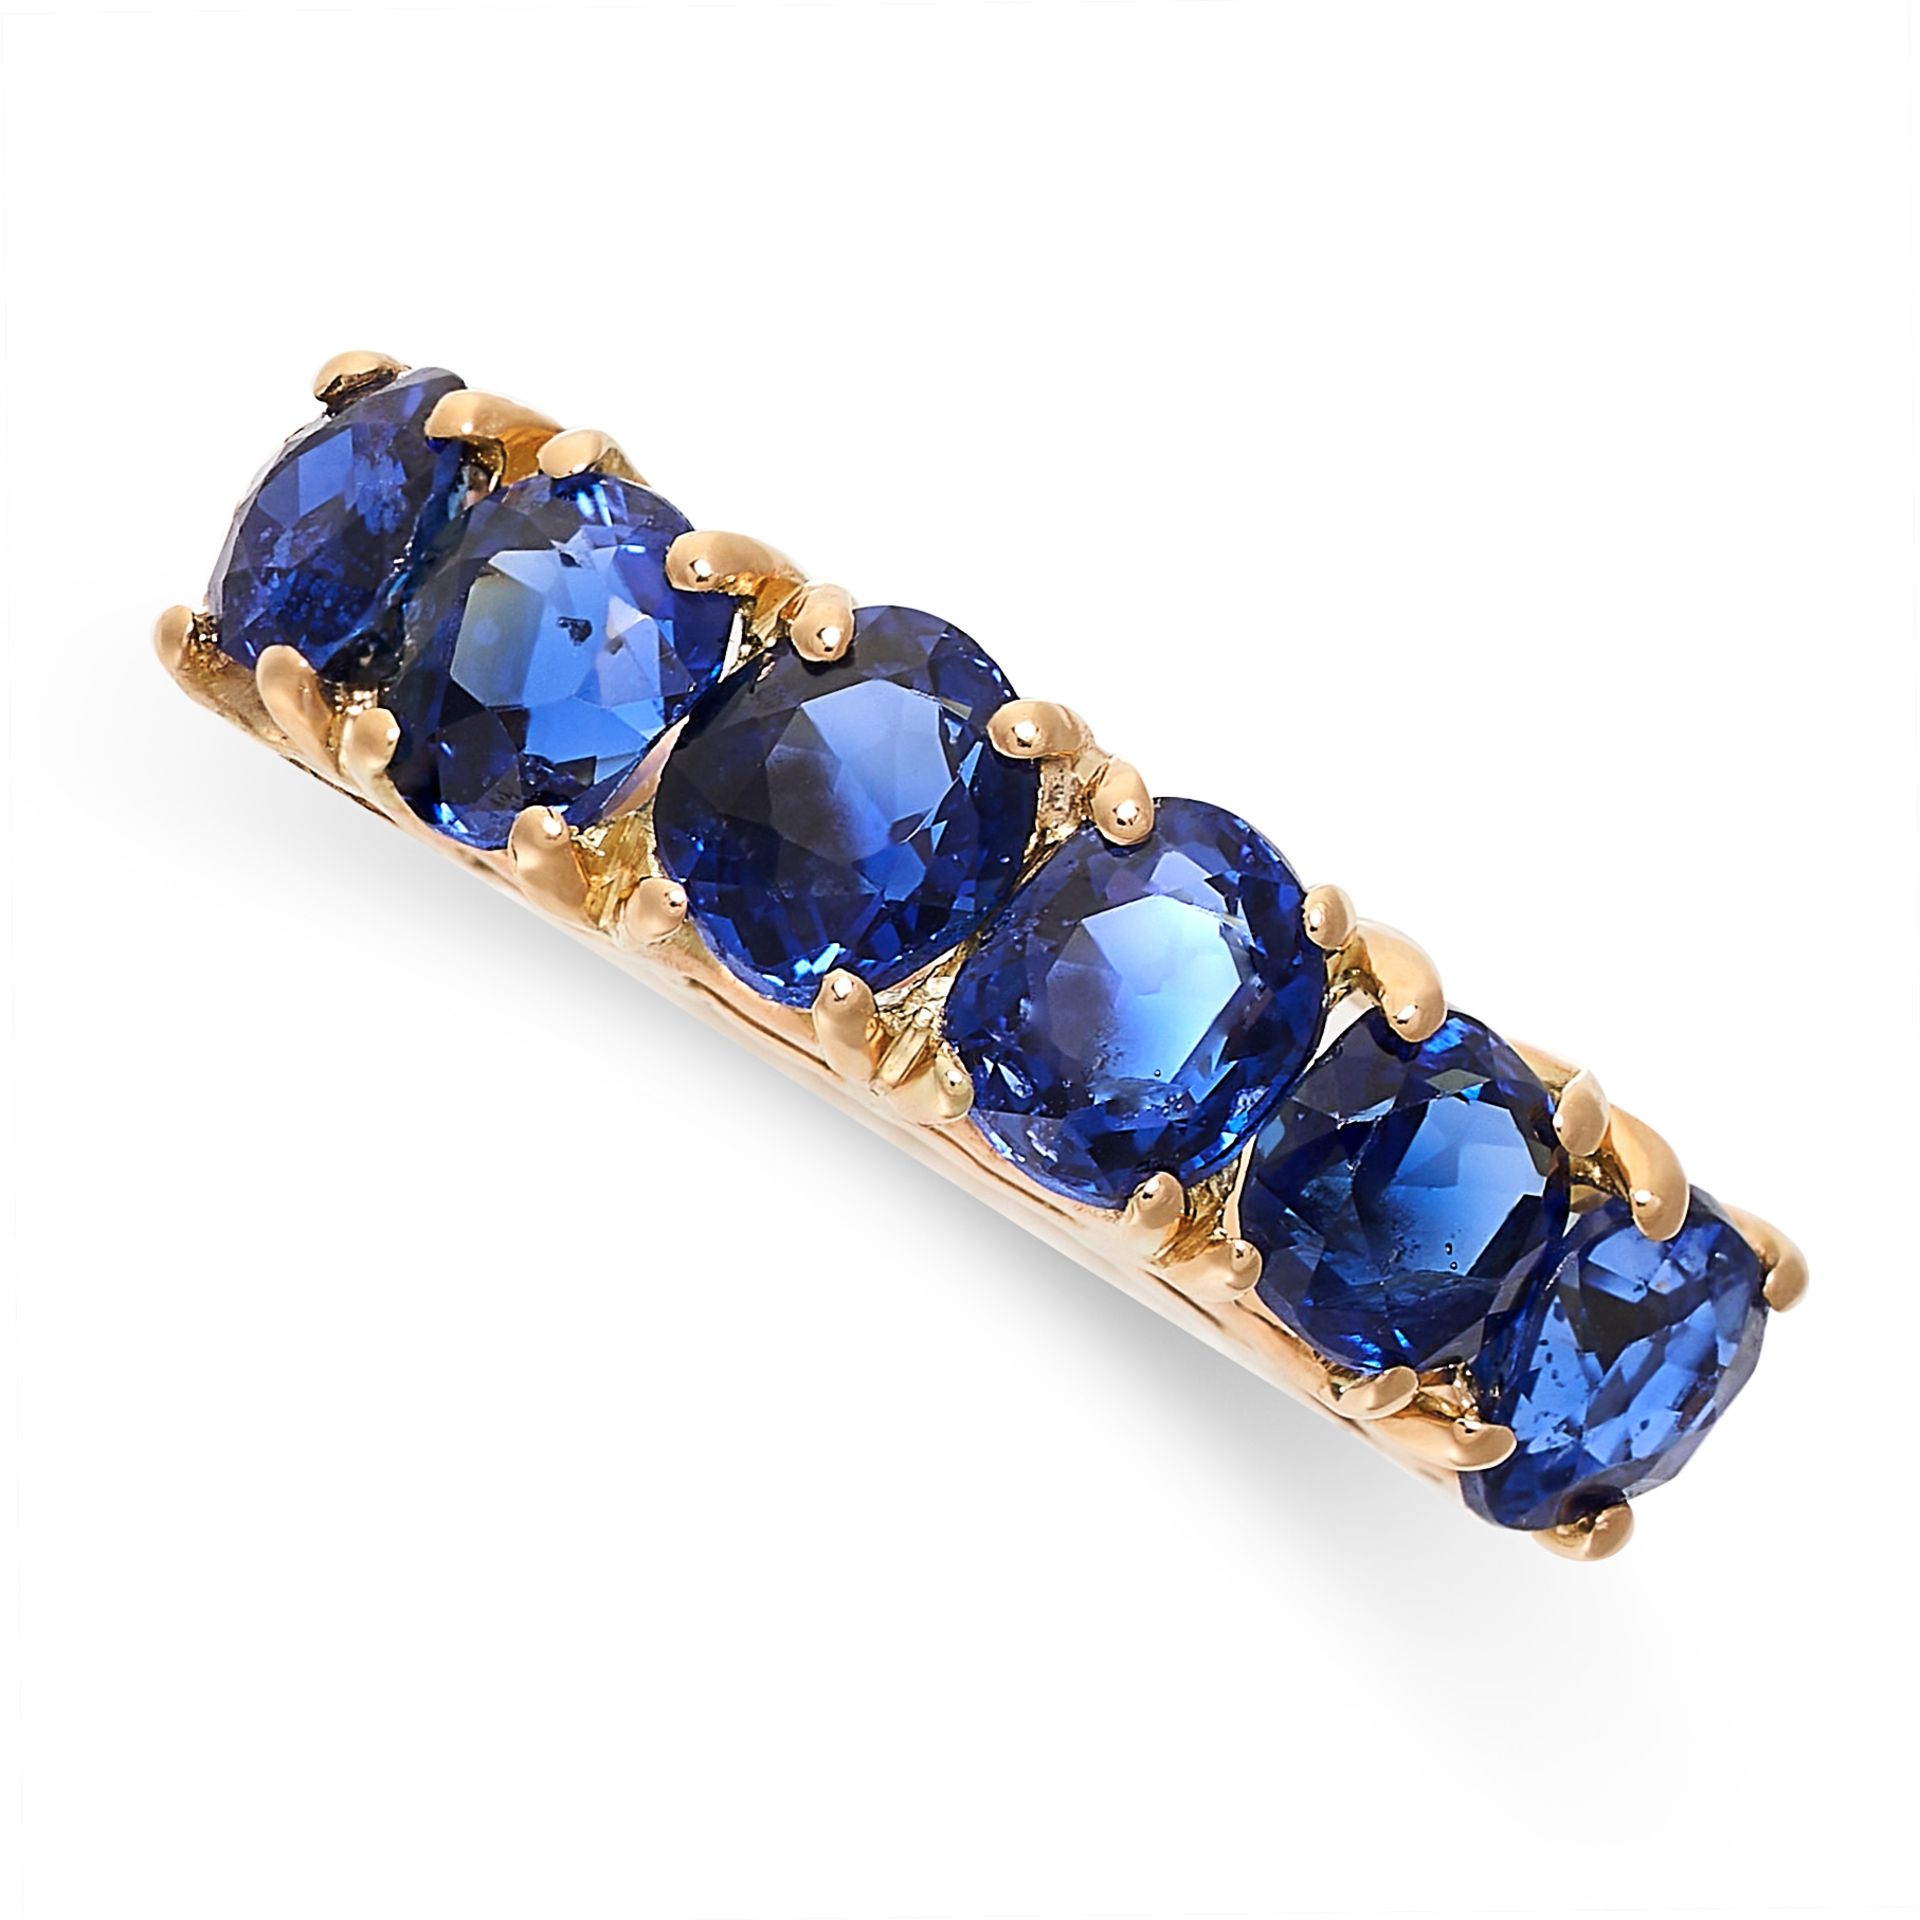 A CEYLON NO HEAT SAPPHIRE AND DIAMOND DRESS RING in yellow gold, set with a row of six cushion cut